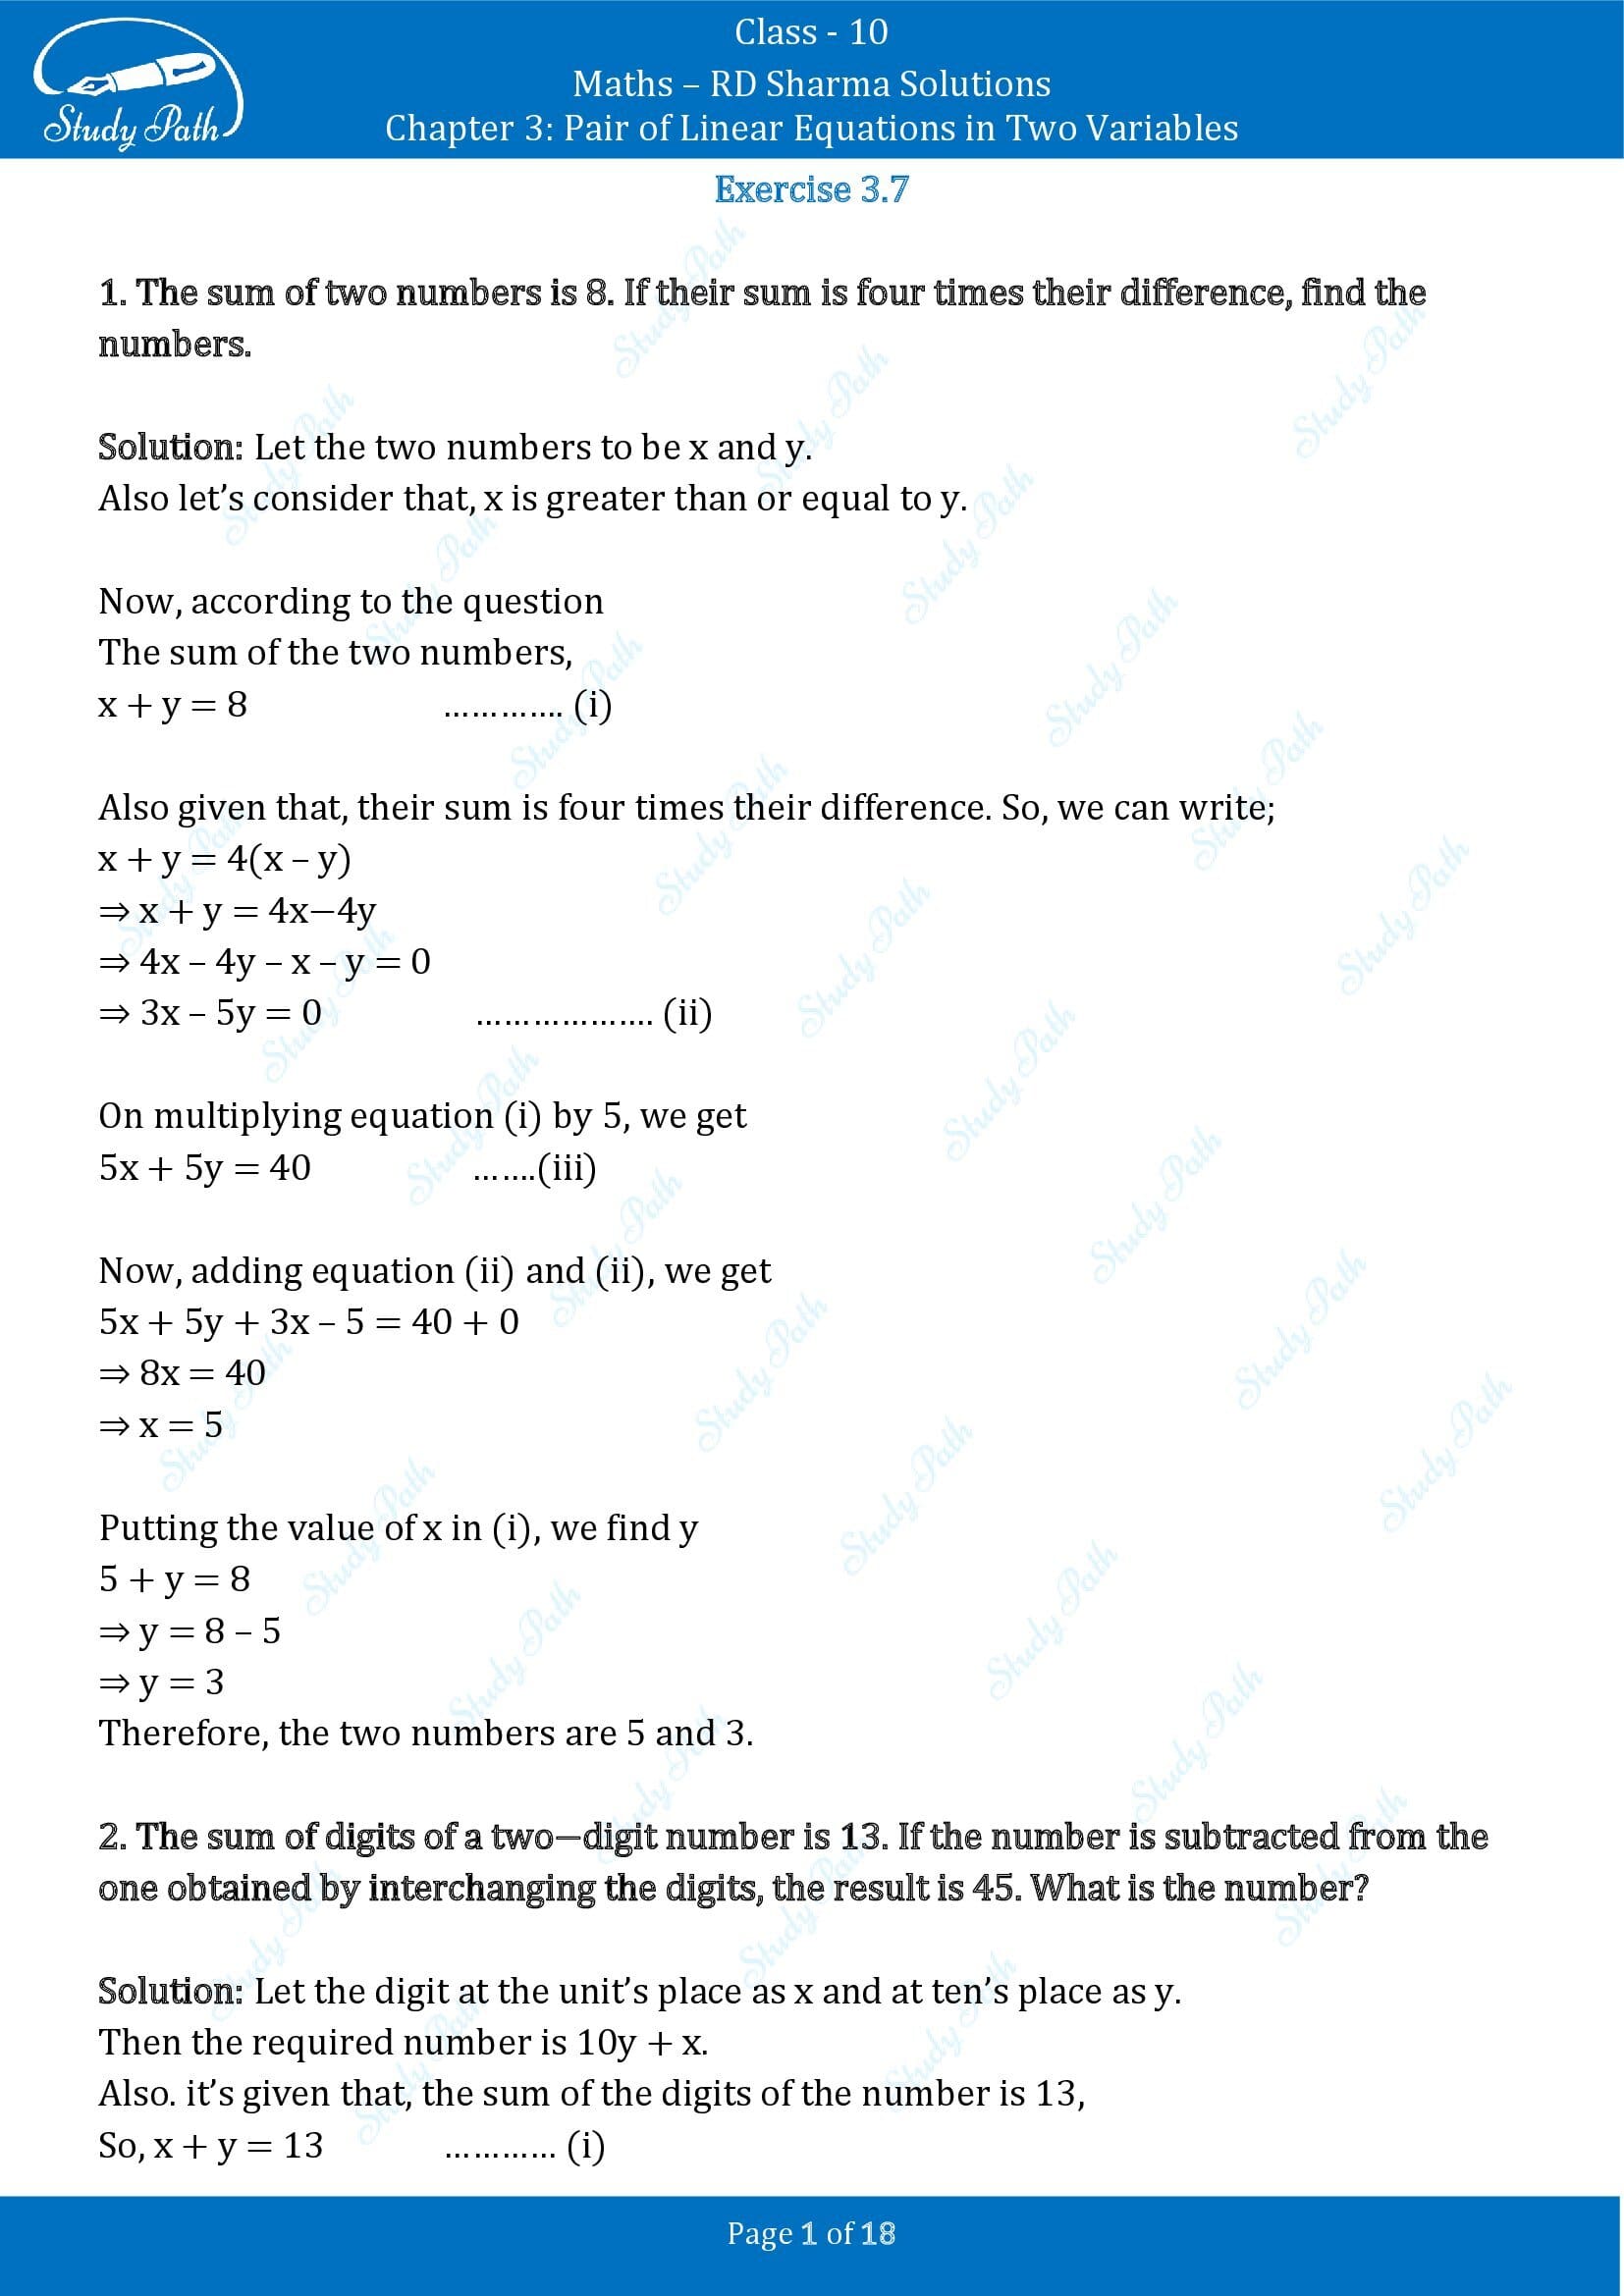 RD Sharma Solutions Class 10 Chapter 3 Pair of Linear Equations in Two Variables Exercise 3.7 00001